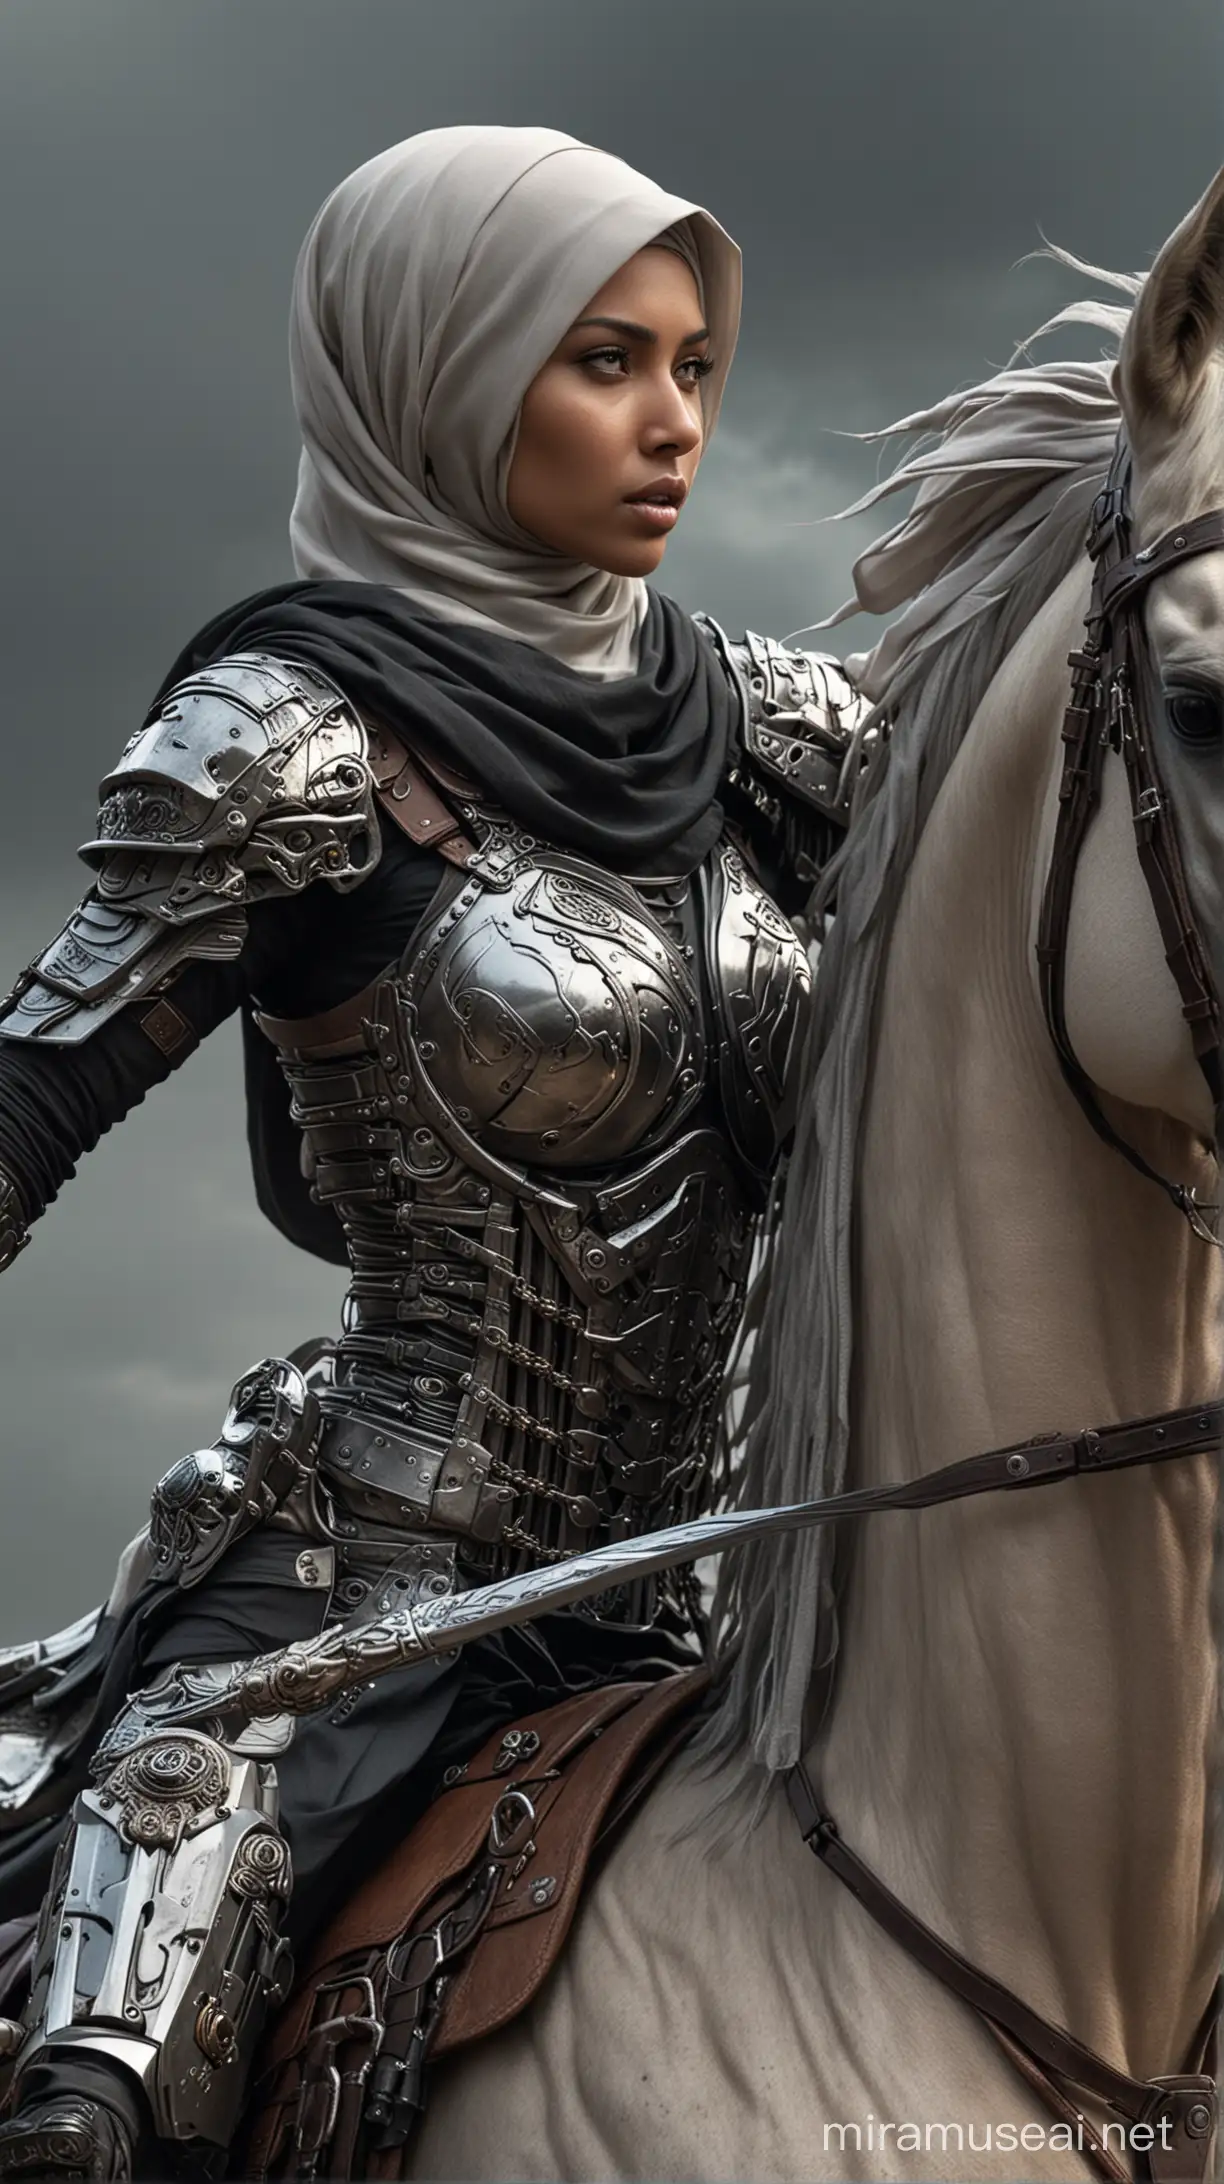 Biomechanical Warrior Woman with Hijab Riding SwordWielding Horse in Apocalyptic Battlefield